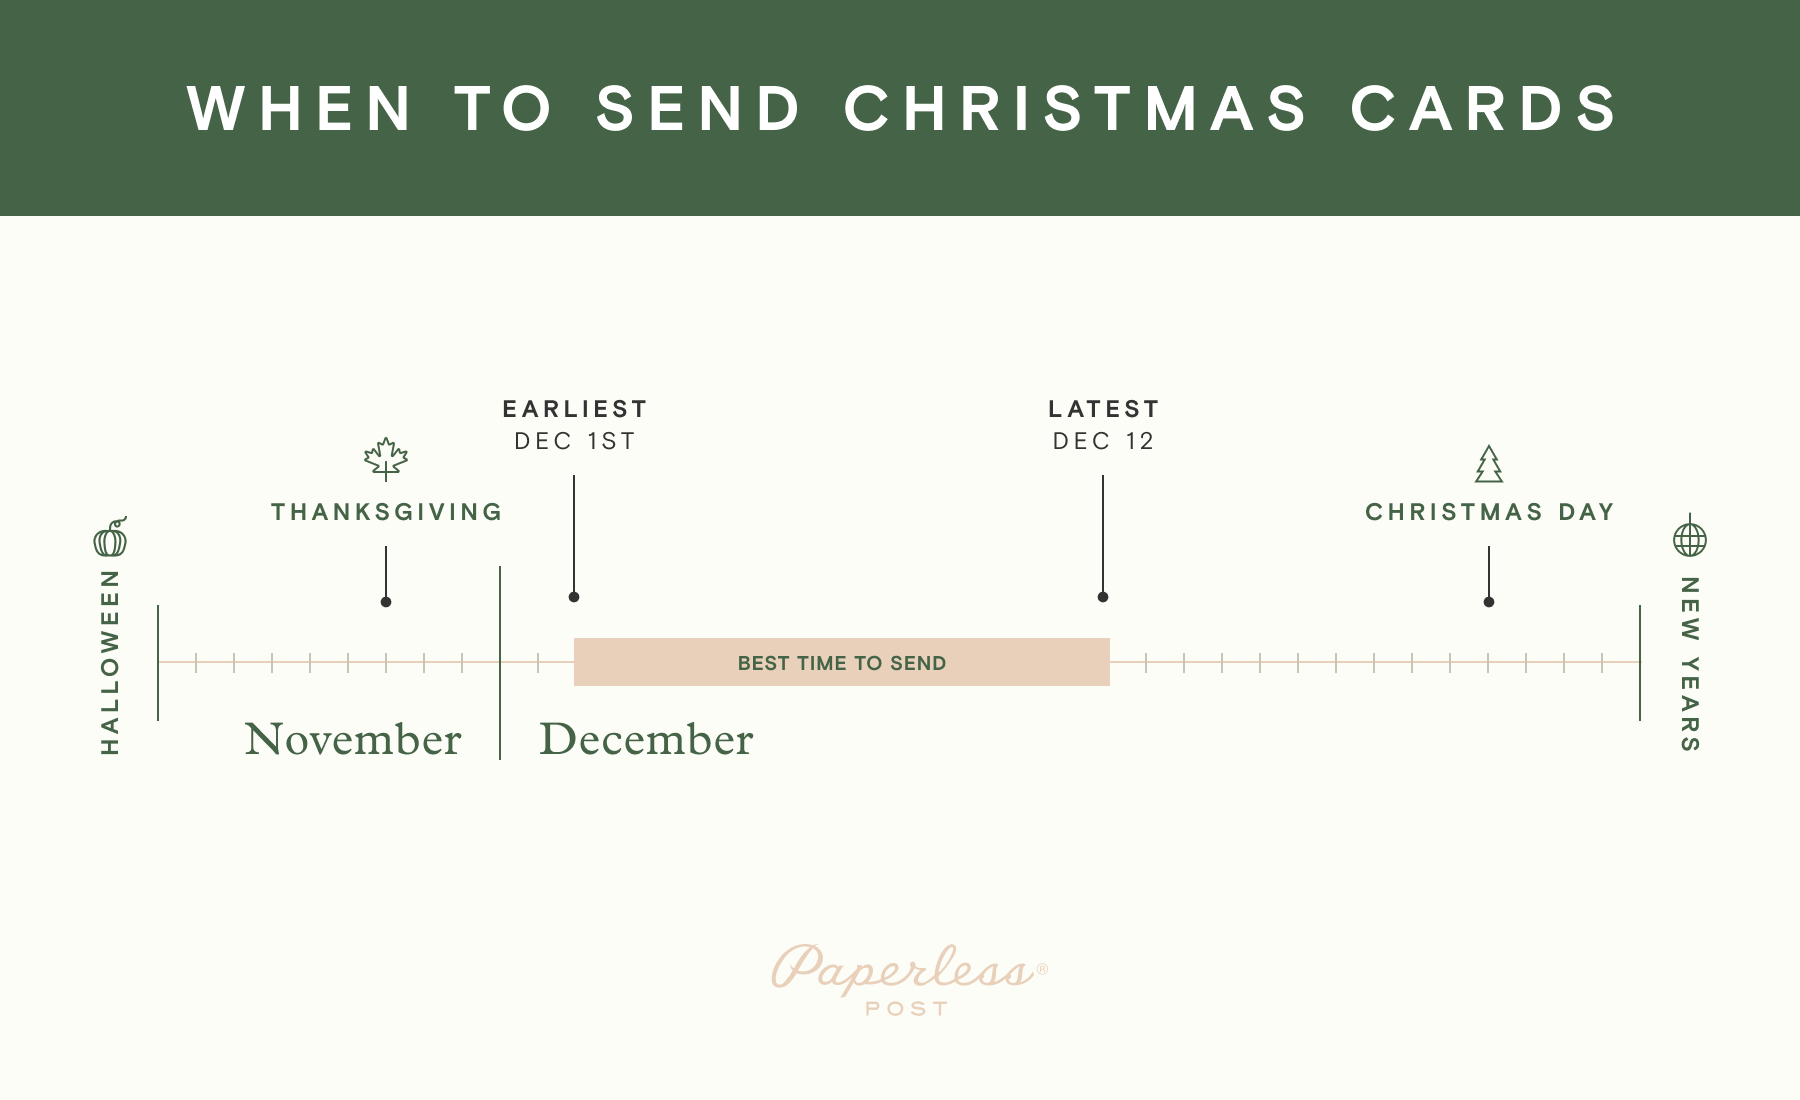 An infographic chart describes when to send Christmas cards using info from this blog post.